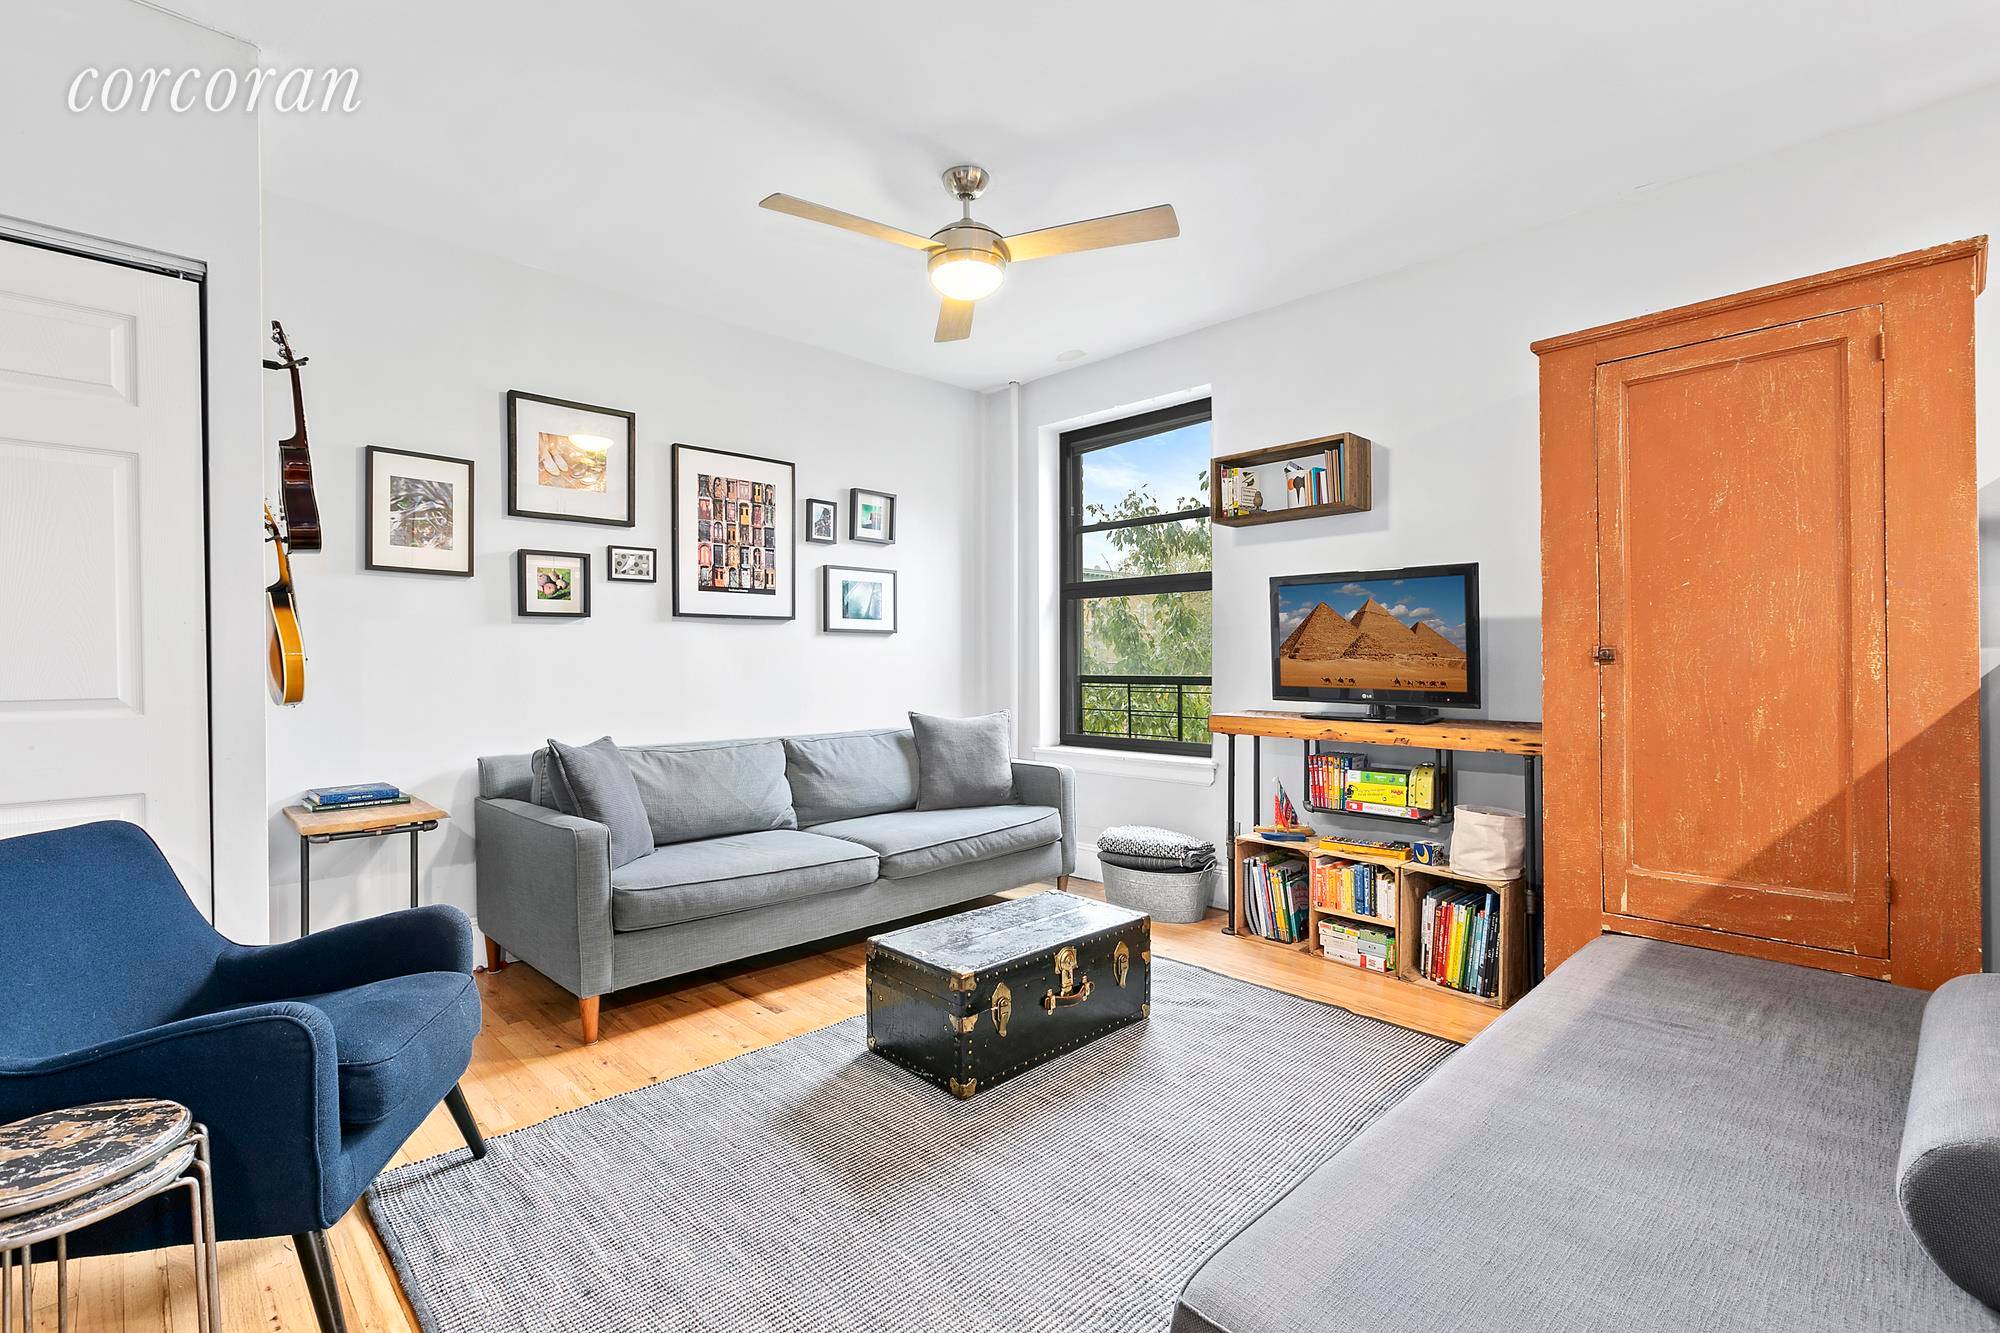 Exceptional 2 bed 1 bath corner unit located on one of the best blocks in Brooklyn.